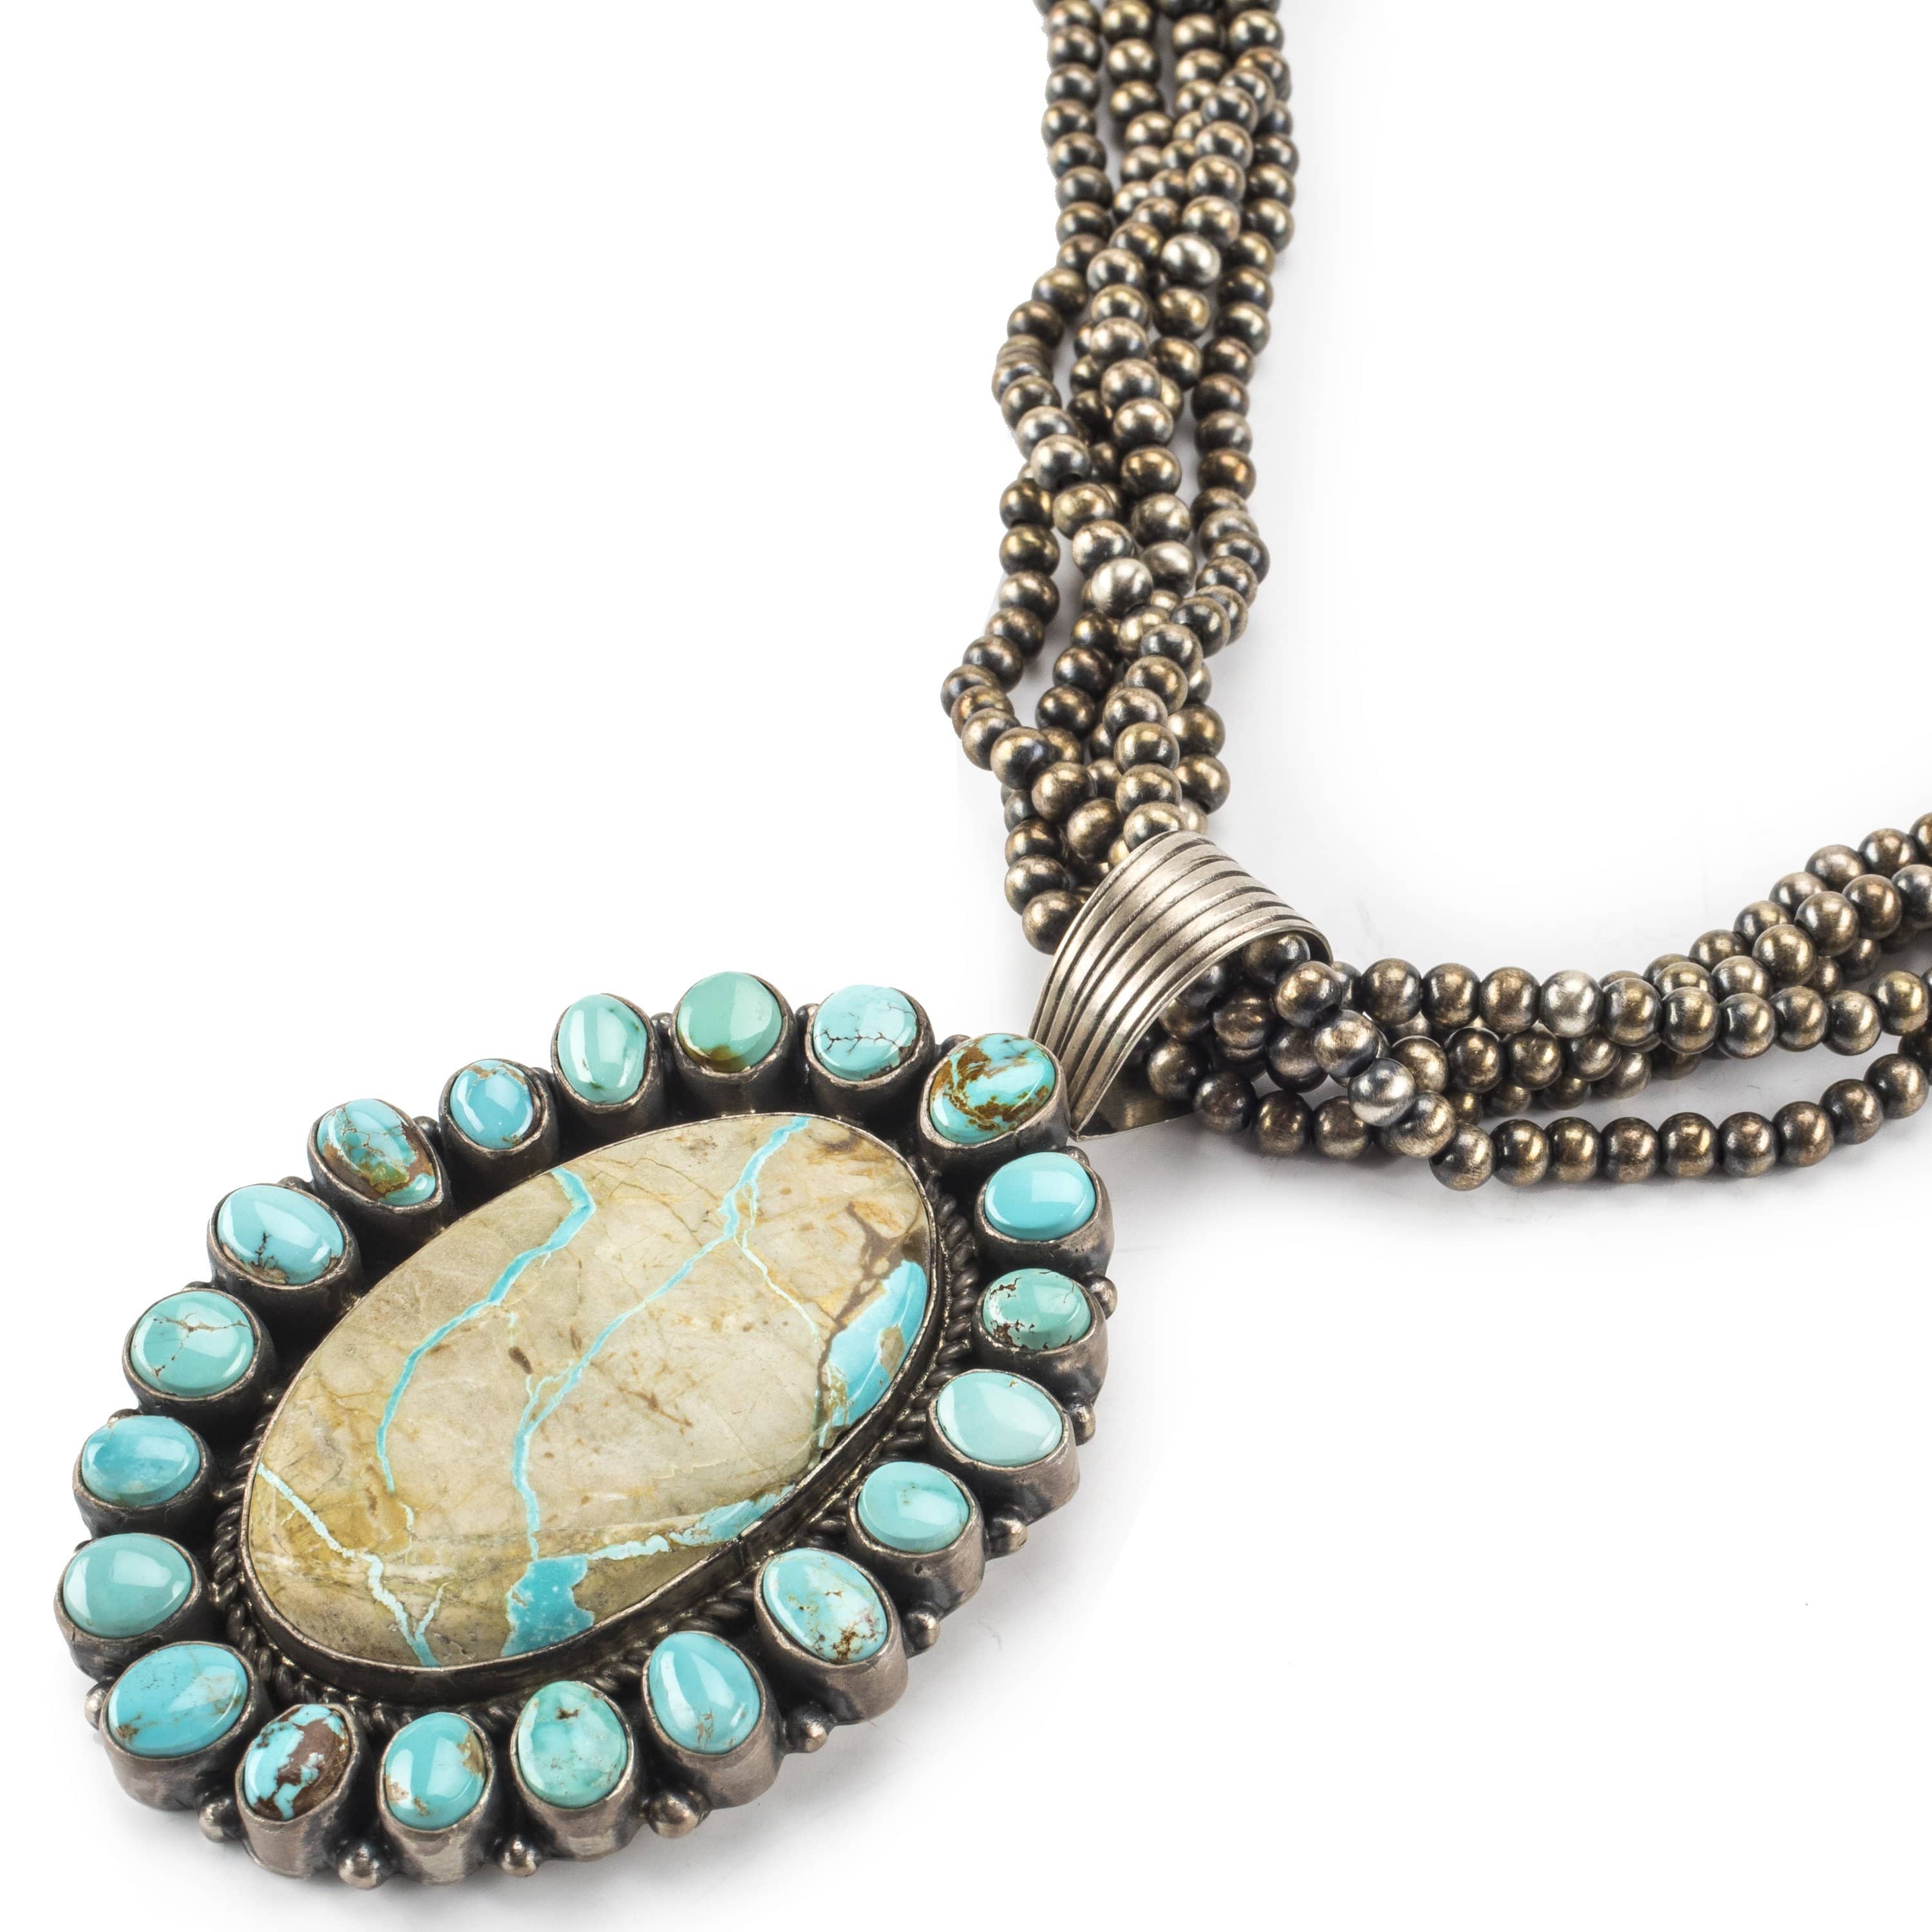 Kalifano Native American Jewelry Dry Creek and Boulder Turquoise Pendant with Navajo Pearl Necklace USA Native American Made 925 Sterling Silver Set NAN3000.004